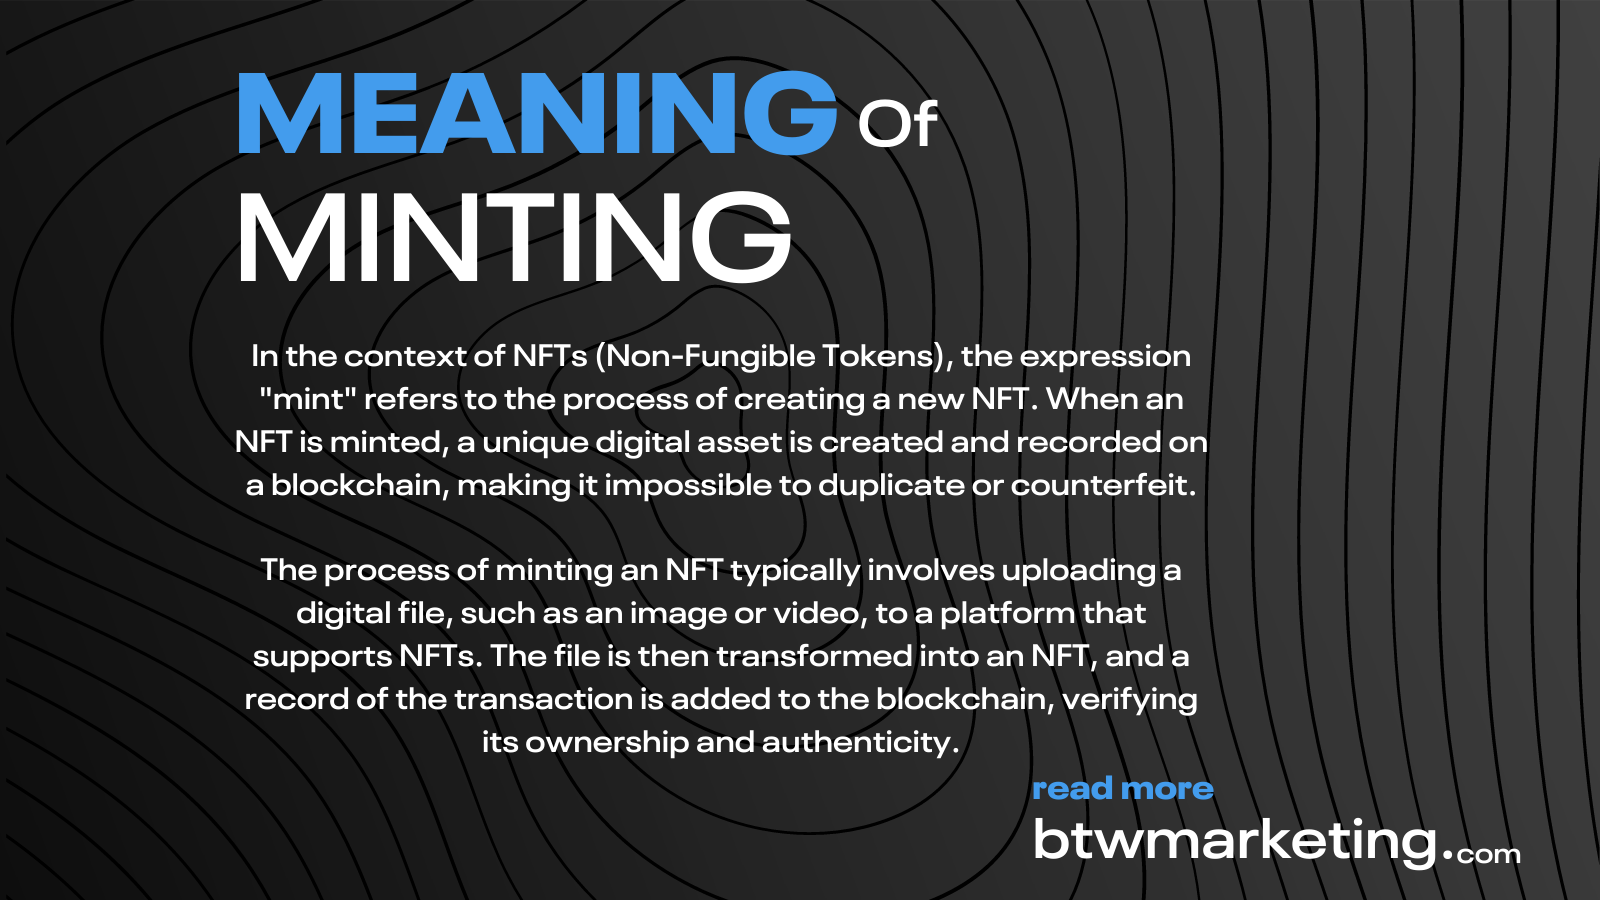 In the context of NFTs (Non-Fungible Tokens), the expression "mint" refers to the process of creating a new NFT. When an NFT is minted, a unique digital asset is created and recorded on a blockchain, making it impossible to duplicate or counterfeit.